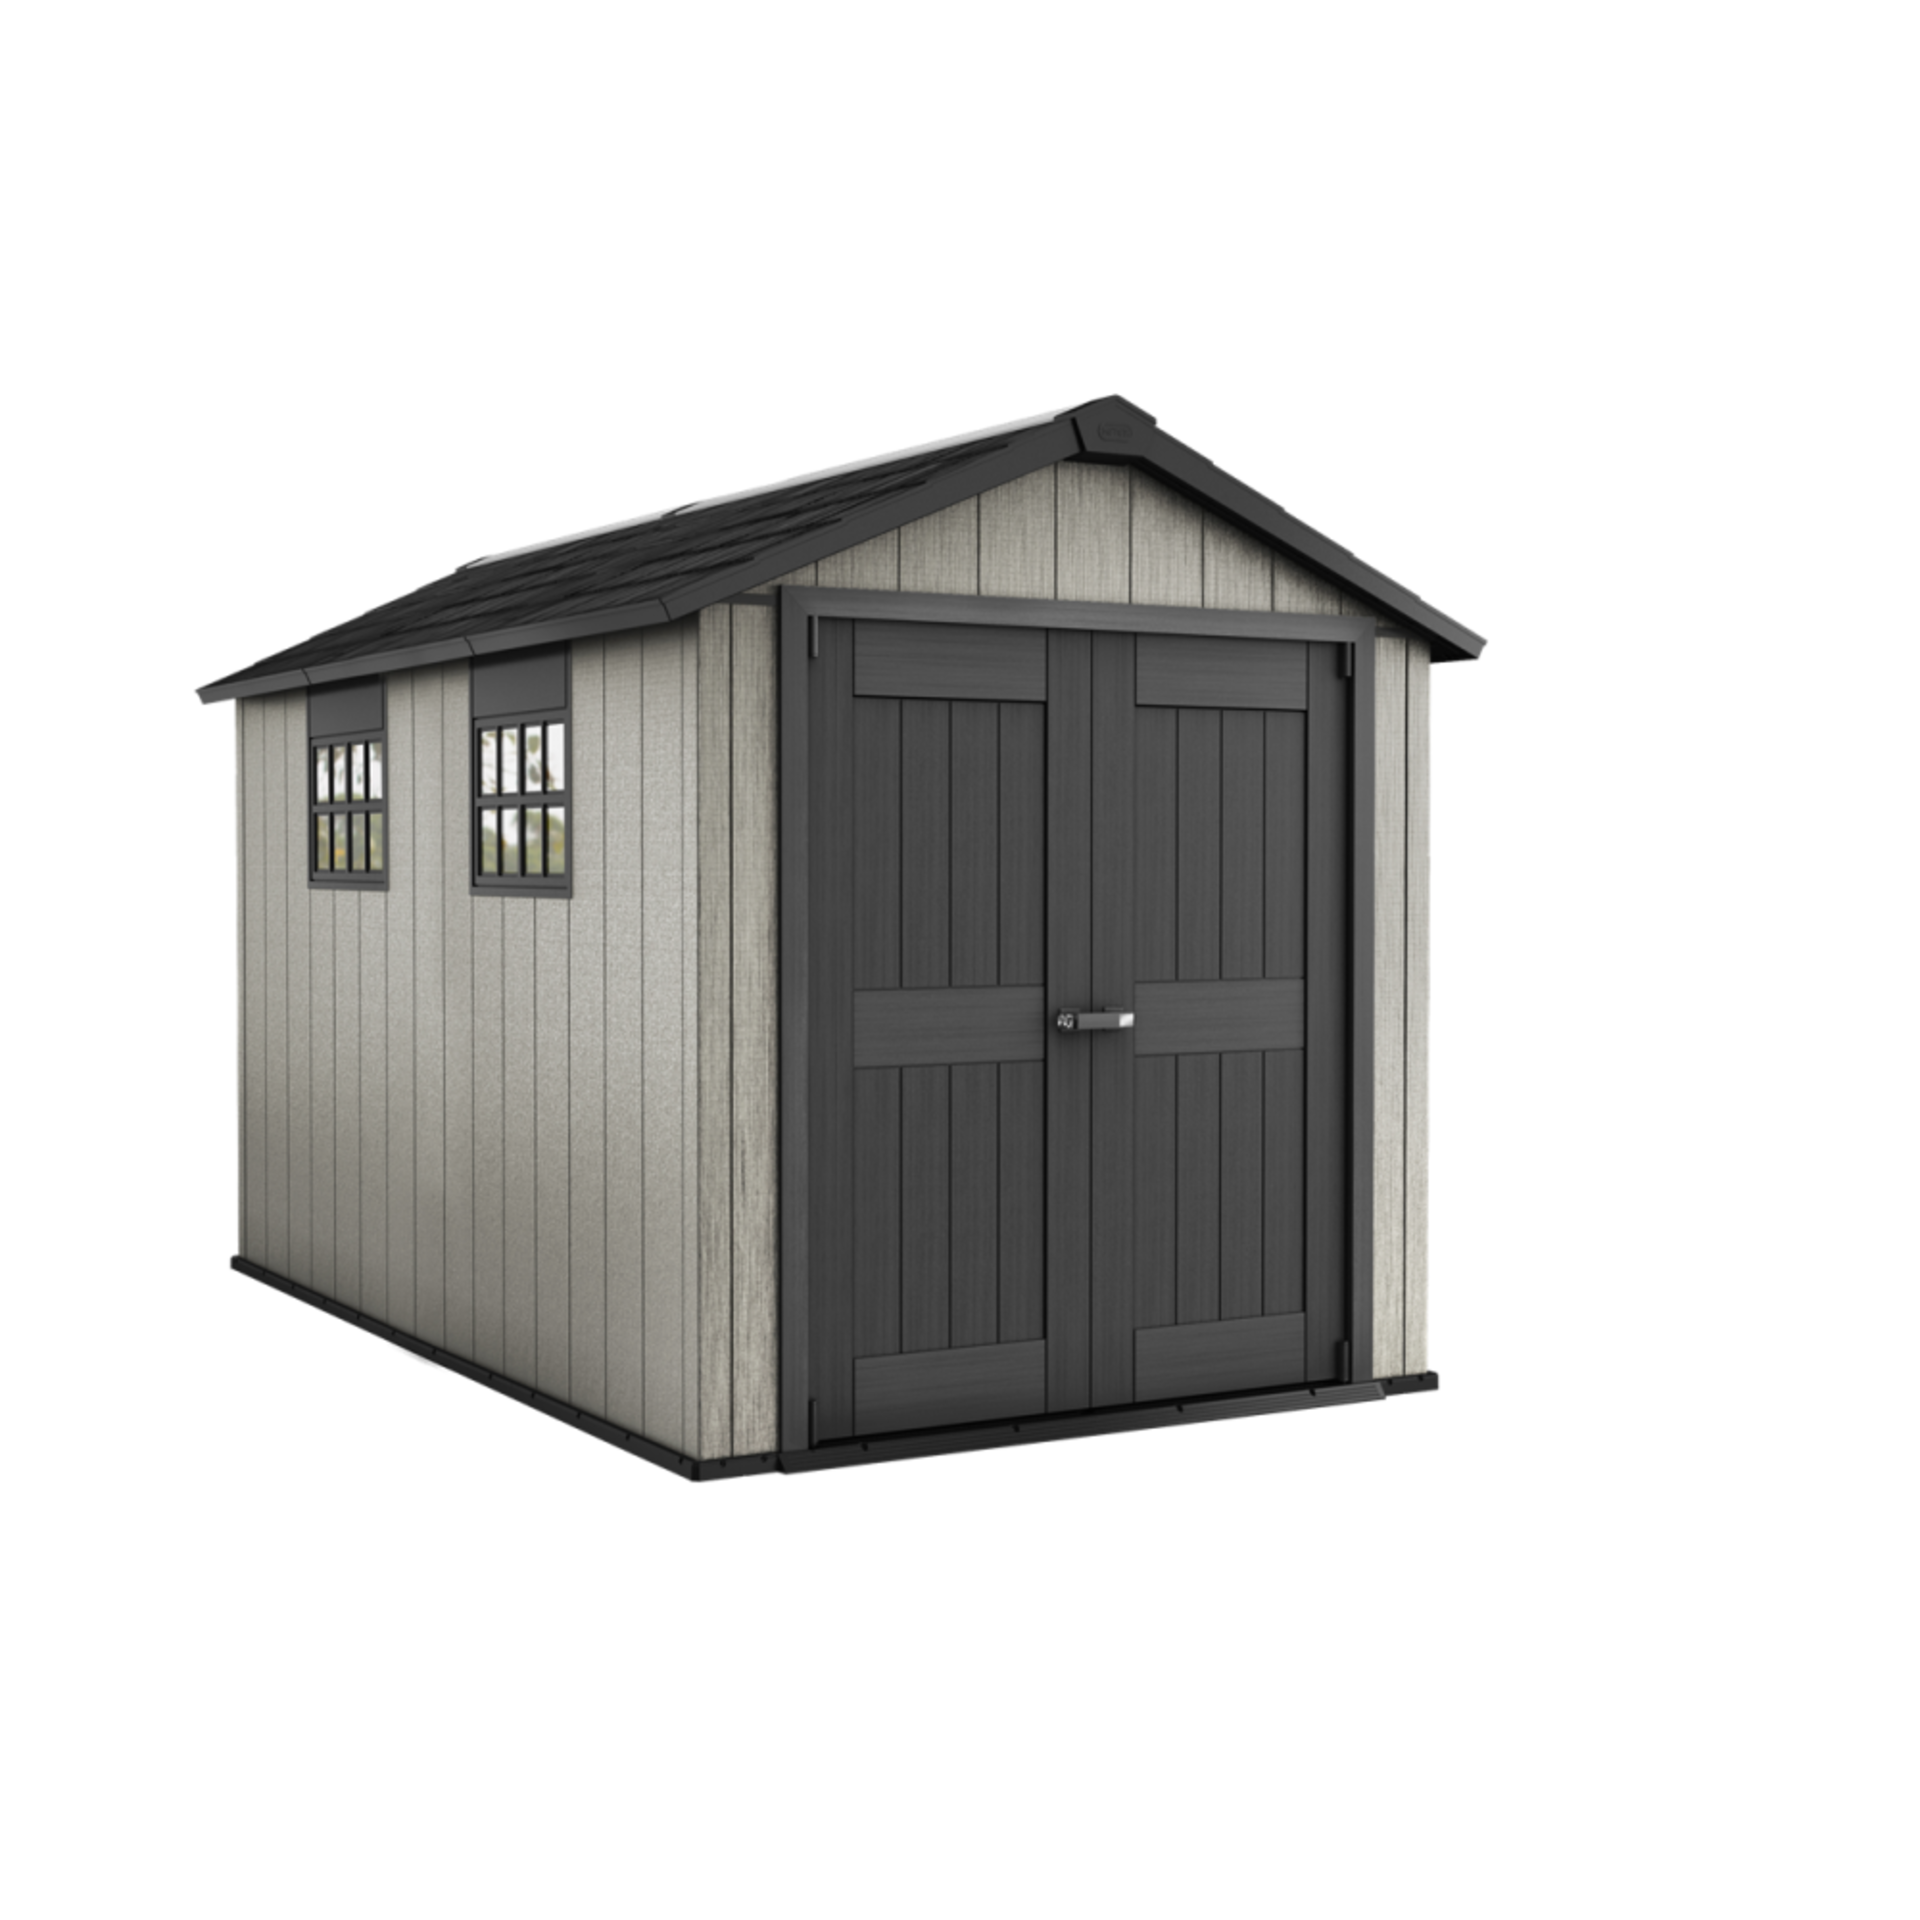 Oakland 7511 shed - New & unboxed on pallet - Image 2 of 2